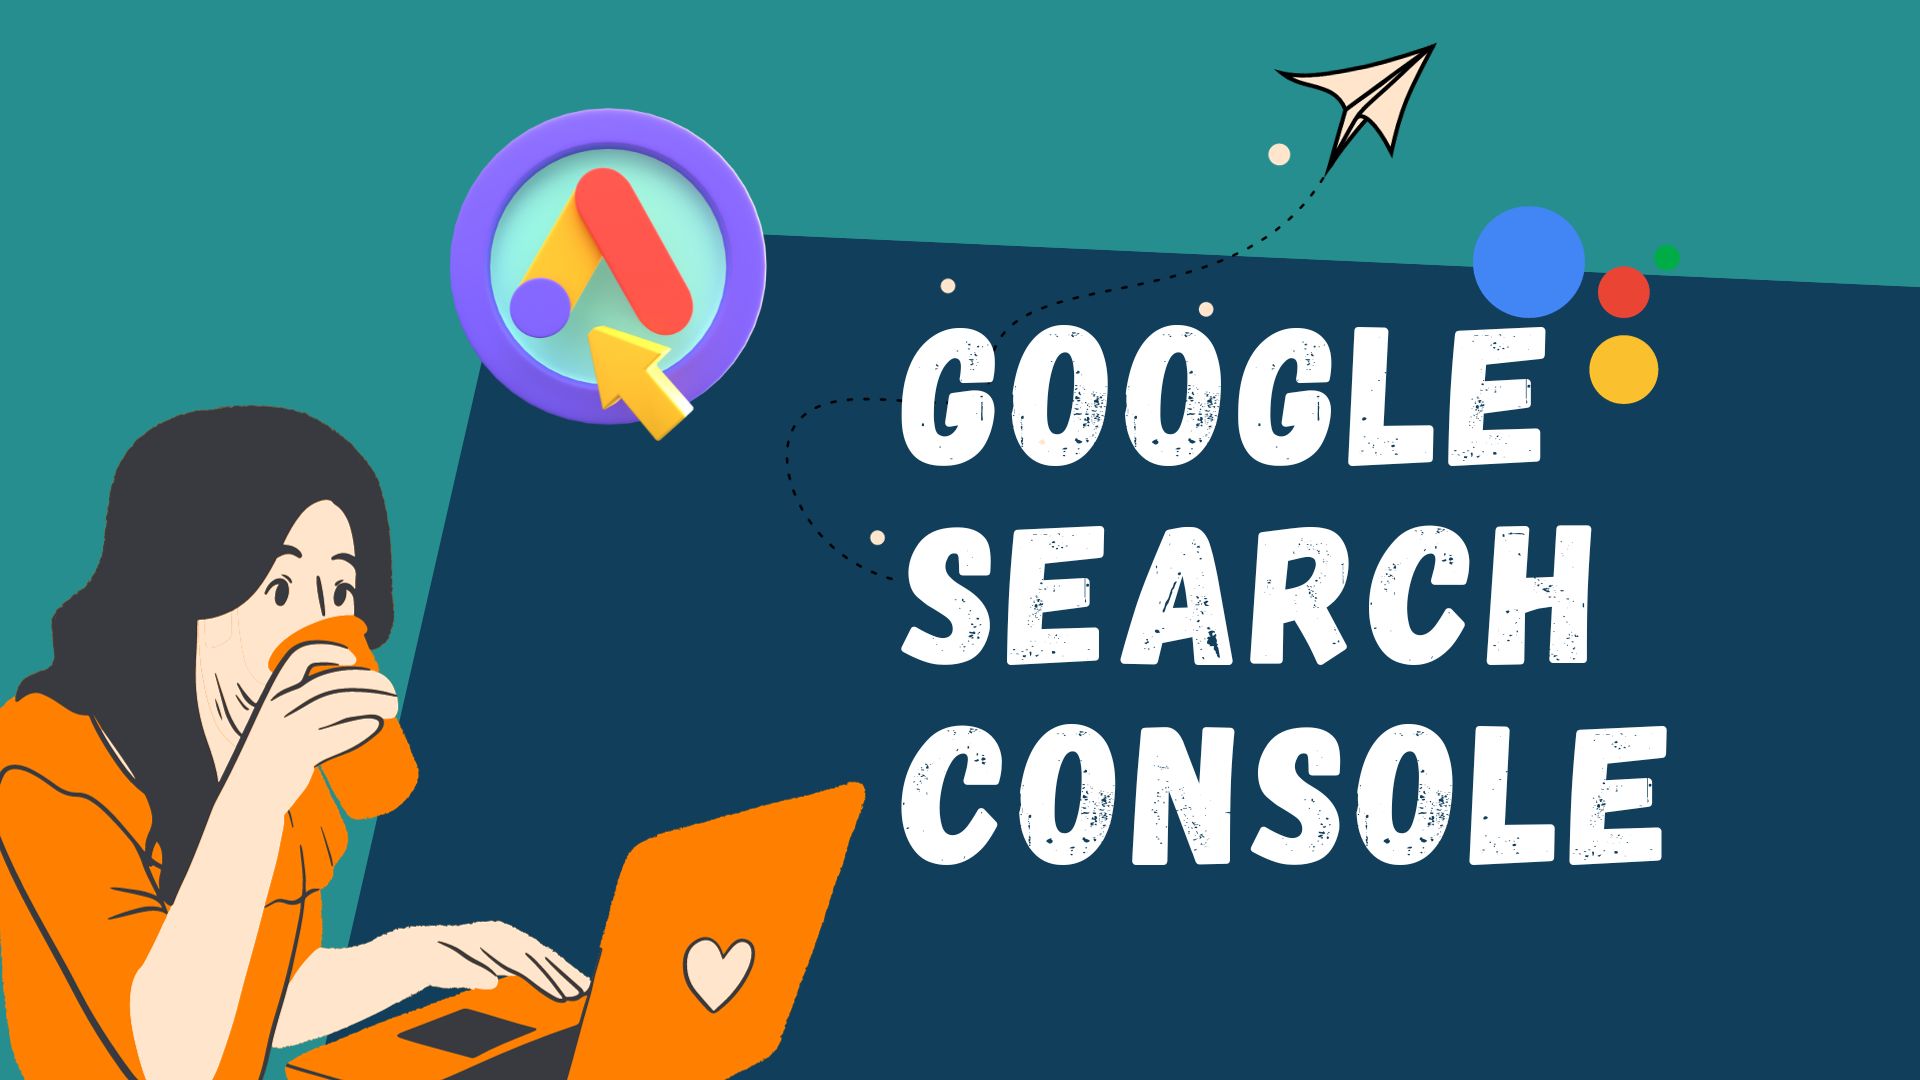 Google Search console Fixing Broken Links and 404 Errors on Your WordPress Website
